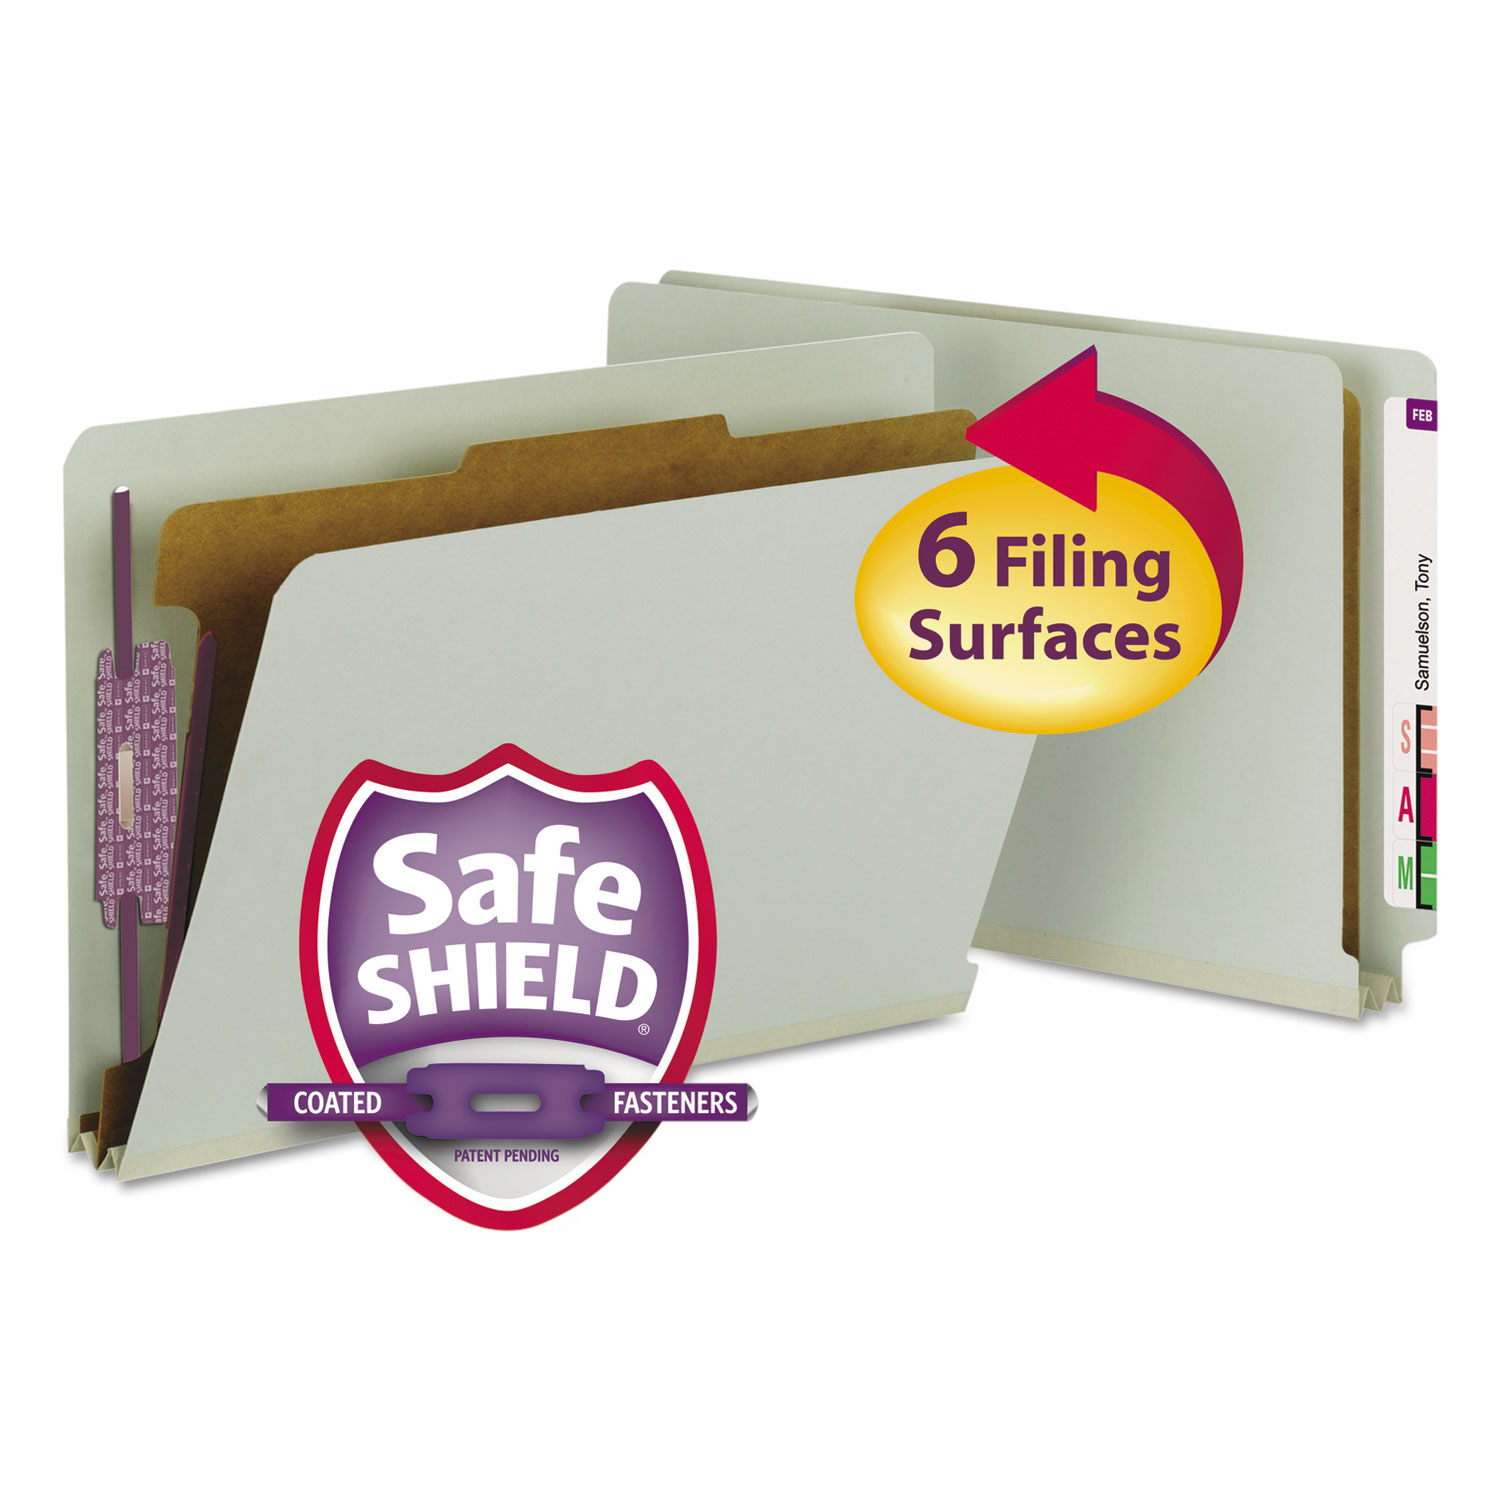  Smead 29800 End Tab Pressboard Classification Folders with SafeSHIELD Coated Fasteners, 1 Divider, Legal Size, Gray-Green, 10/Box (SMD29800) 